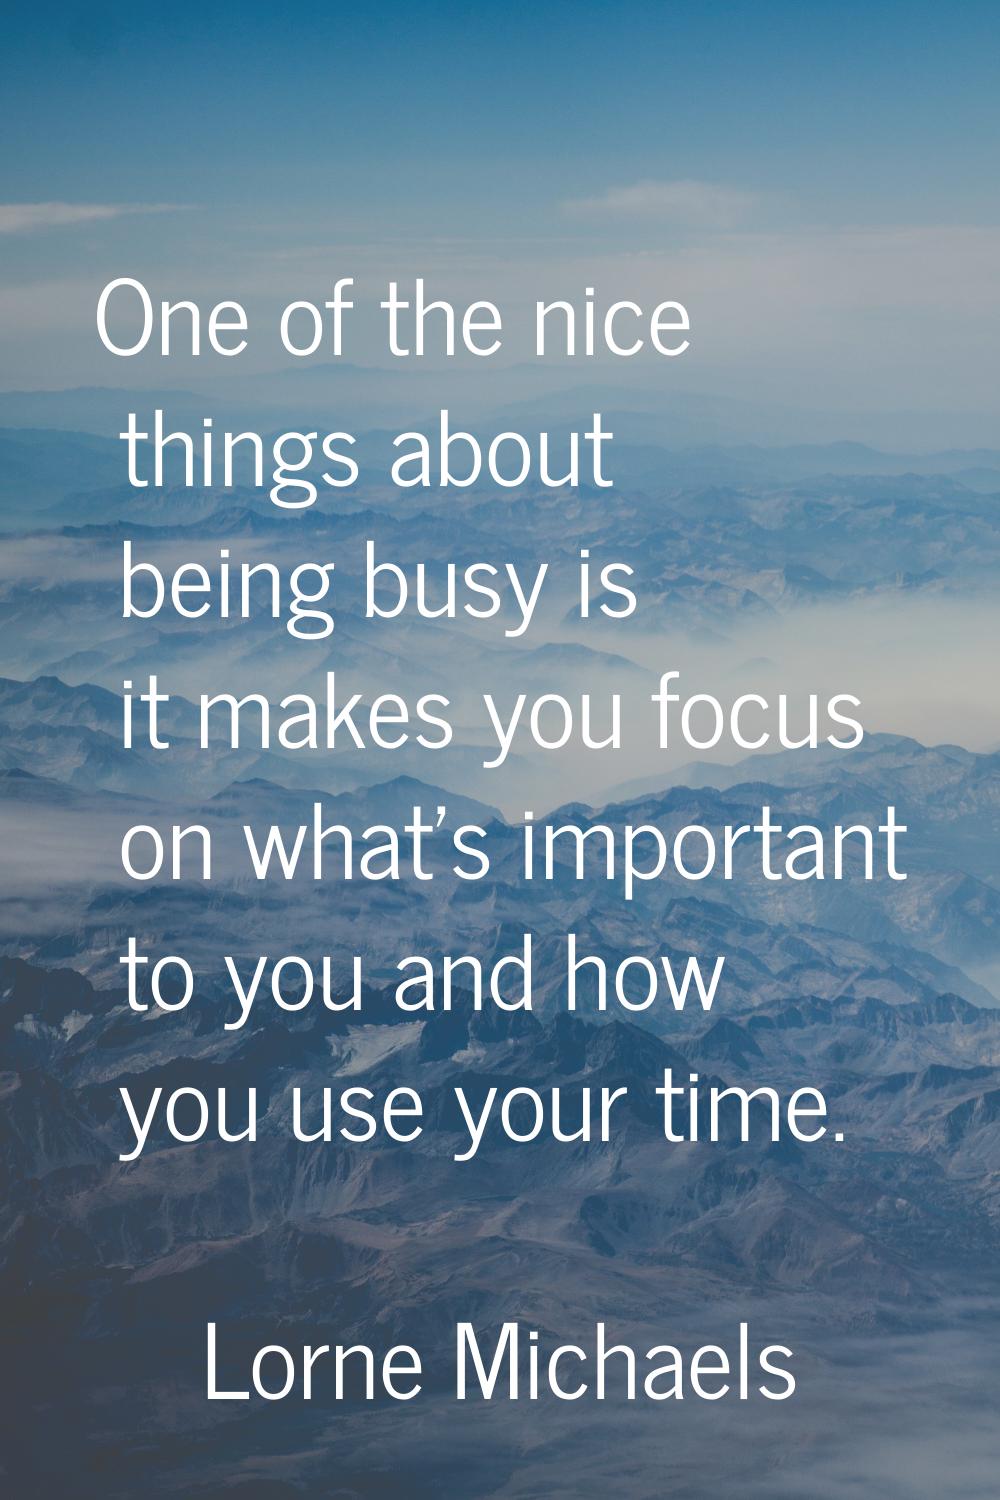 One of the nice things about being busy is it makes you focus on what's important to you and how yo